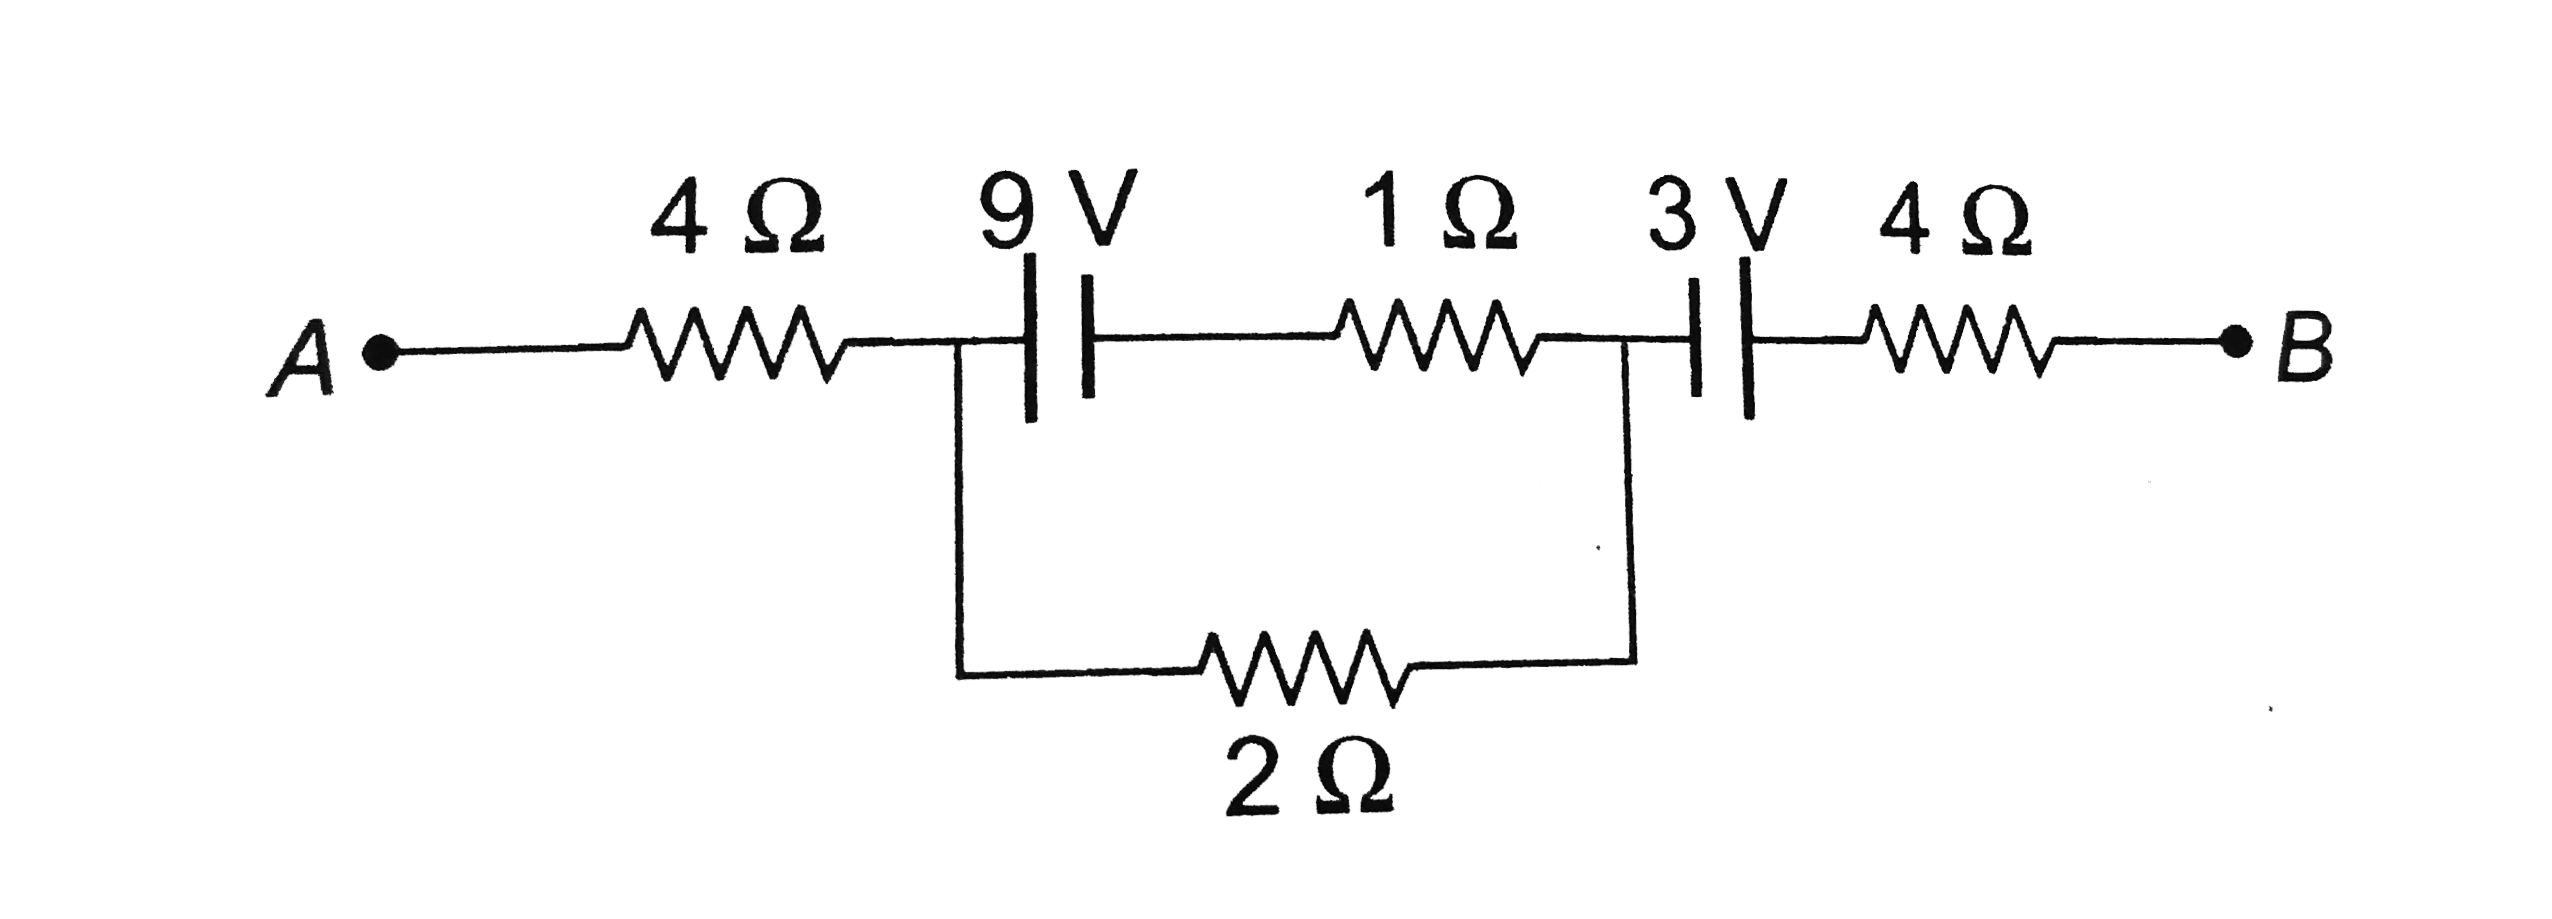 The potential difference between the points A and B in the circuit shown is 16 V, Which is/are  the correct statement(s) out of the following?